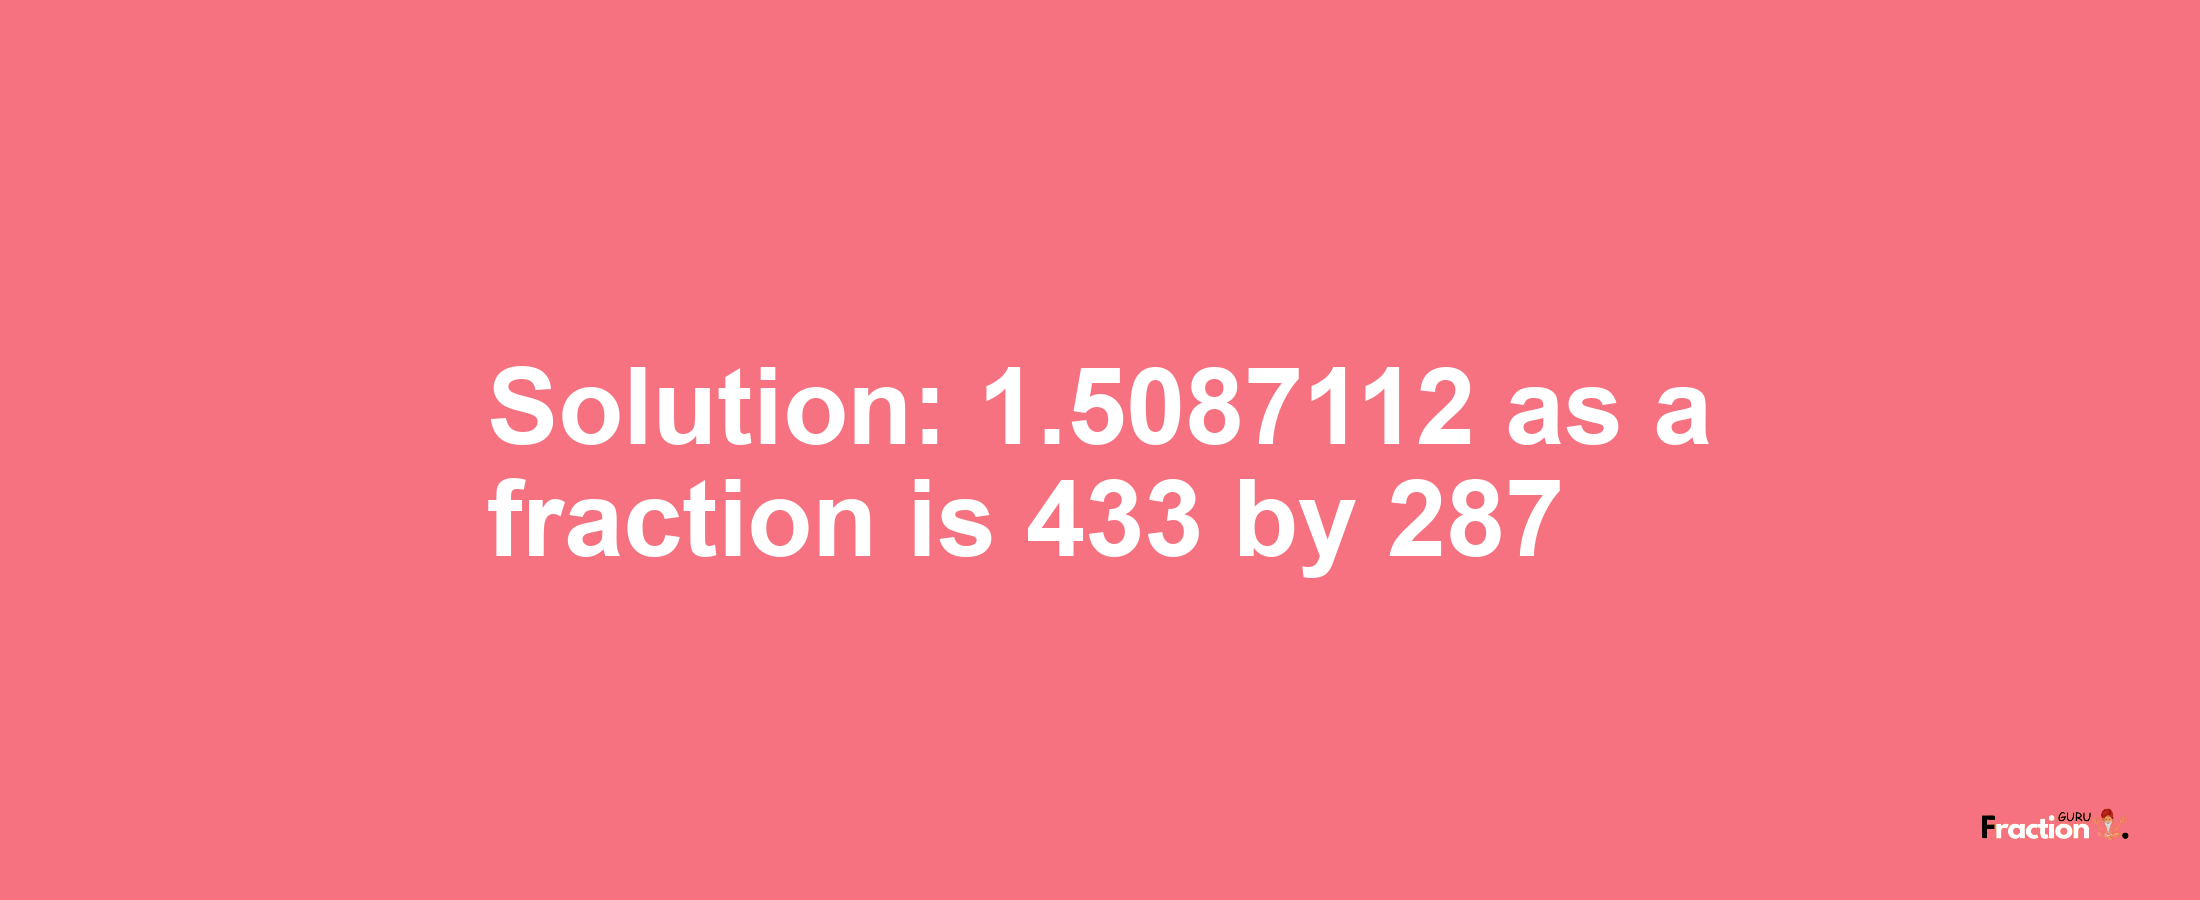 Solution:1.5087112 as a fraction is 433/287